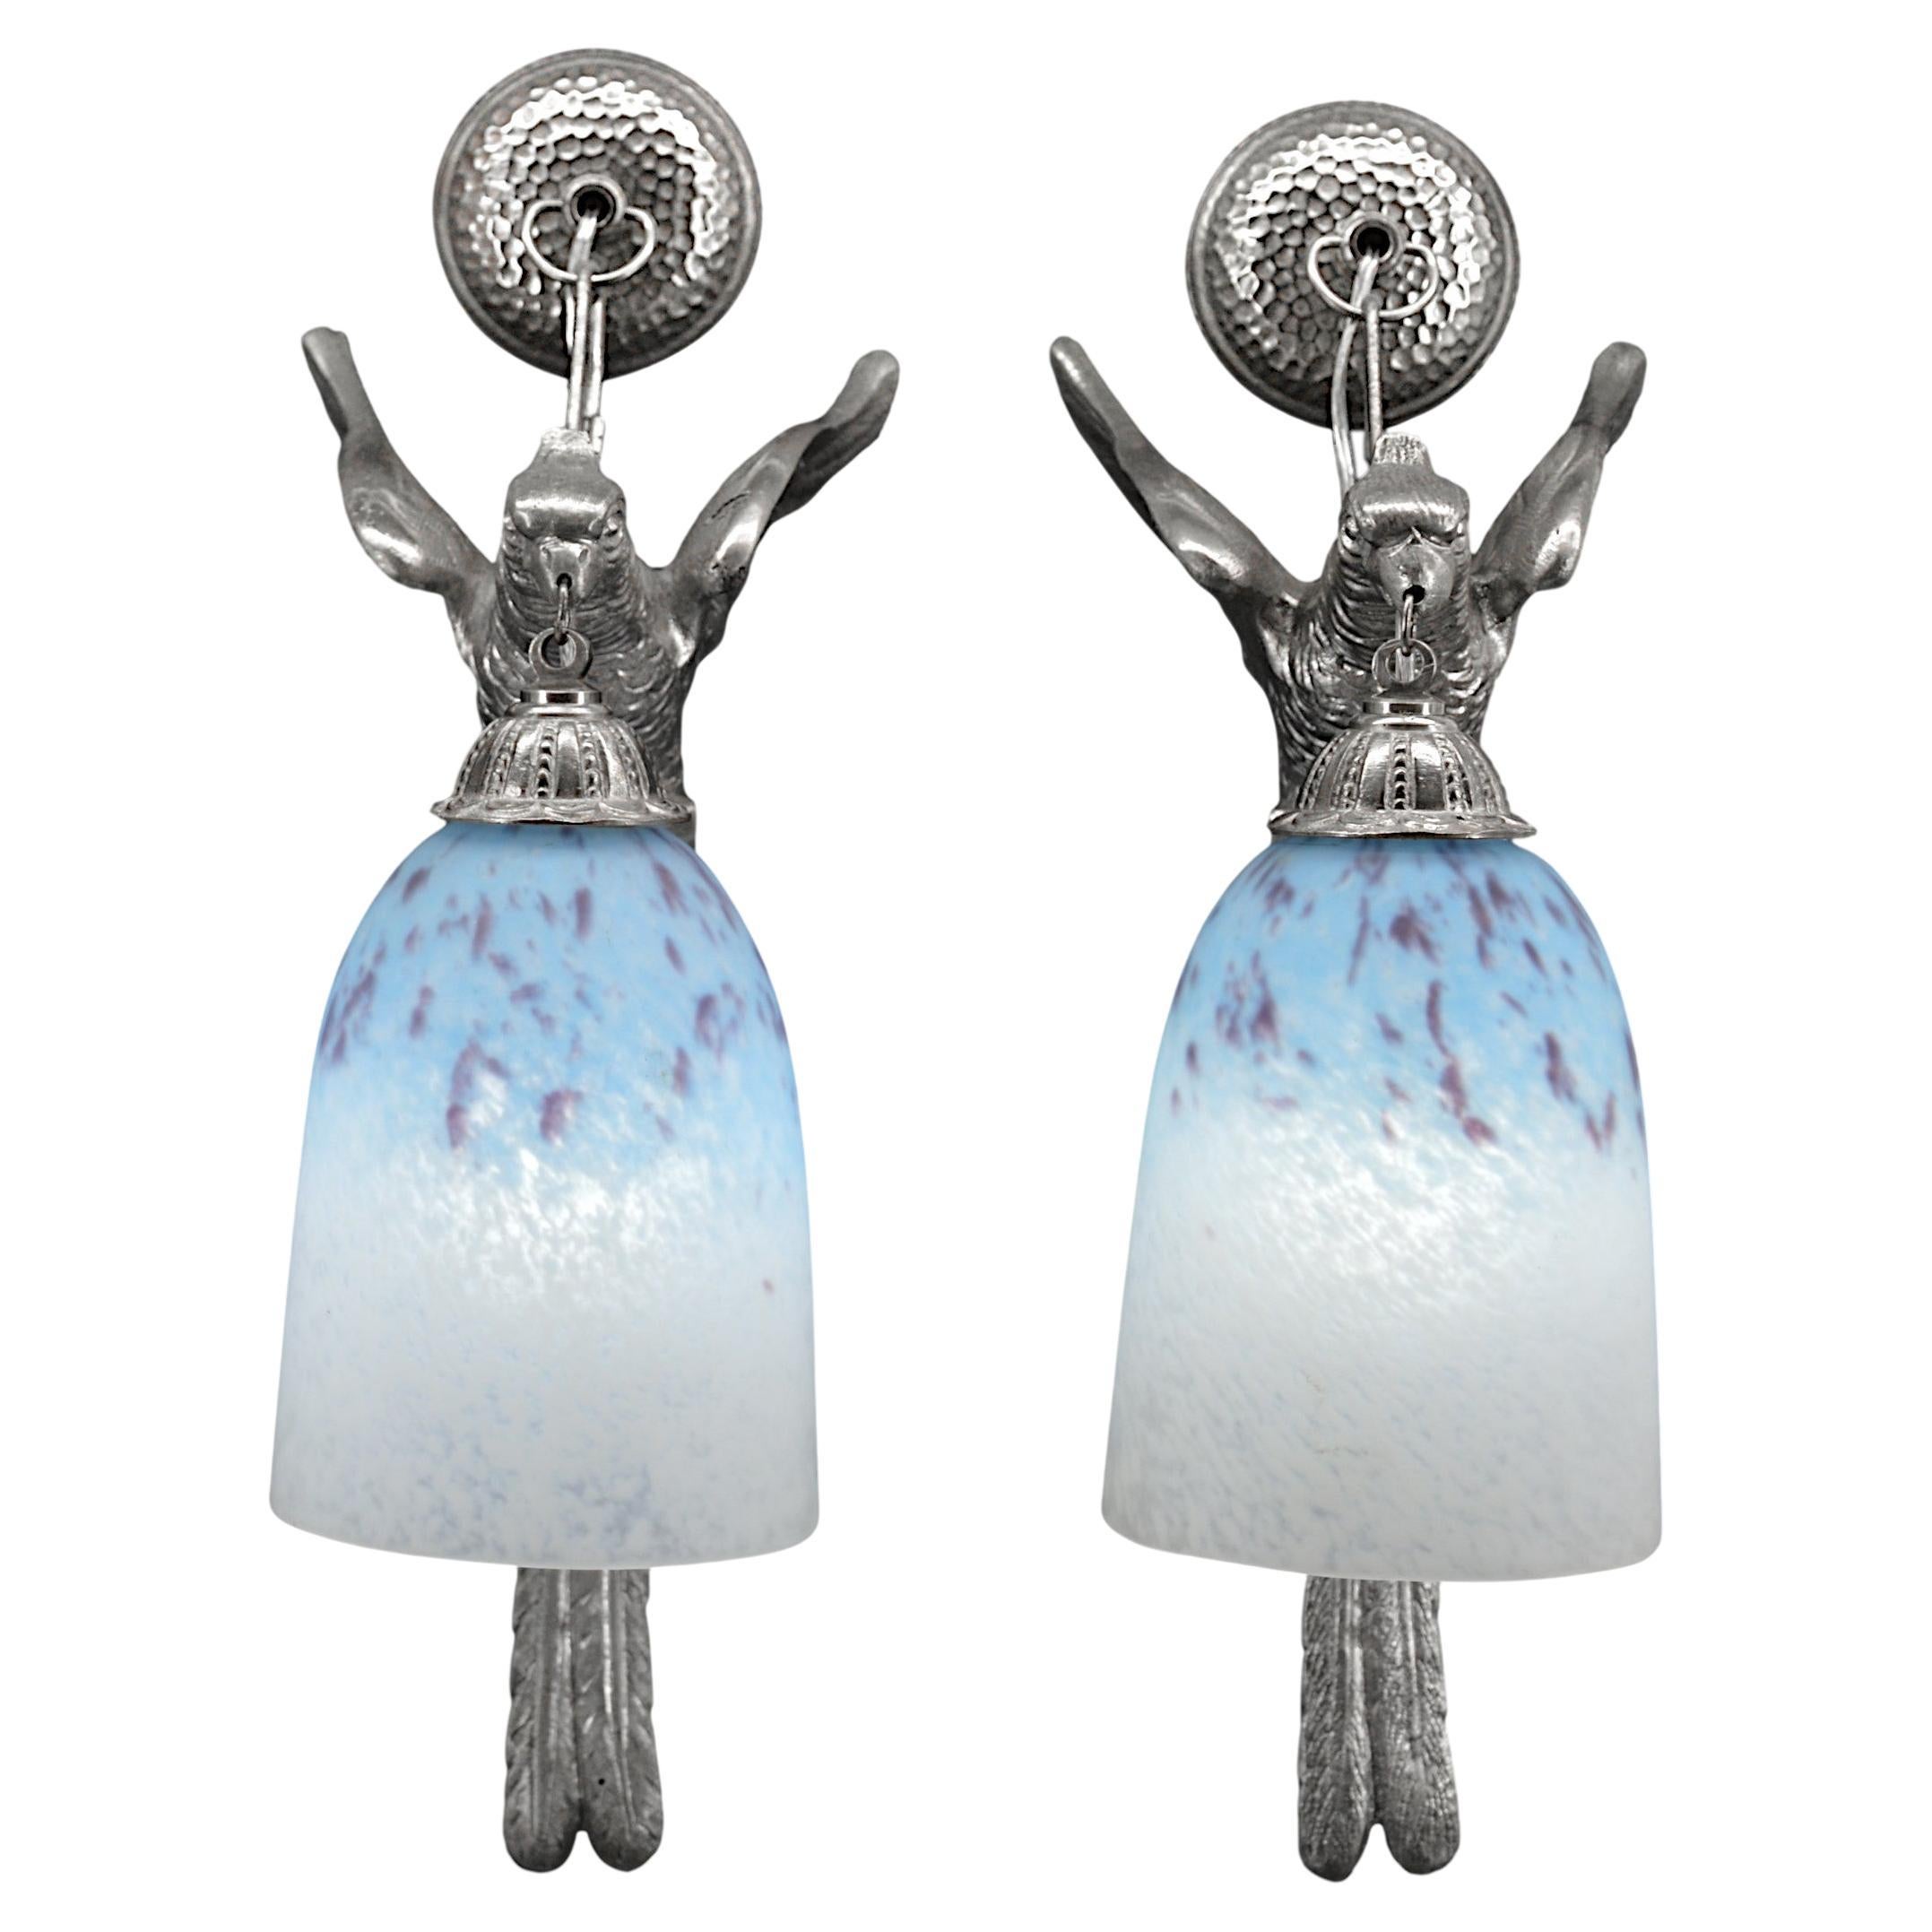 Charles Schneider French Art Deco Pair Wall Sconces, 1928-1929